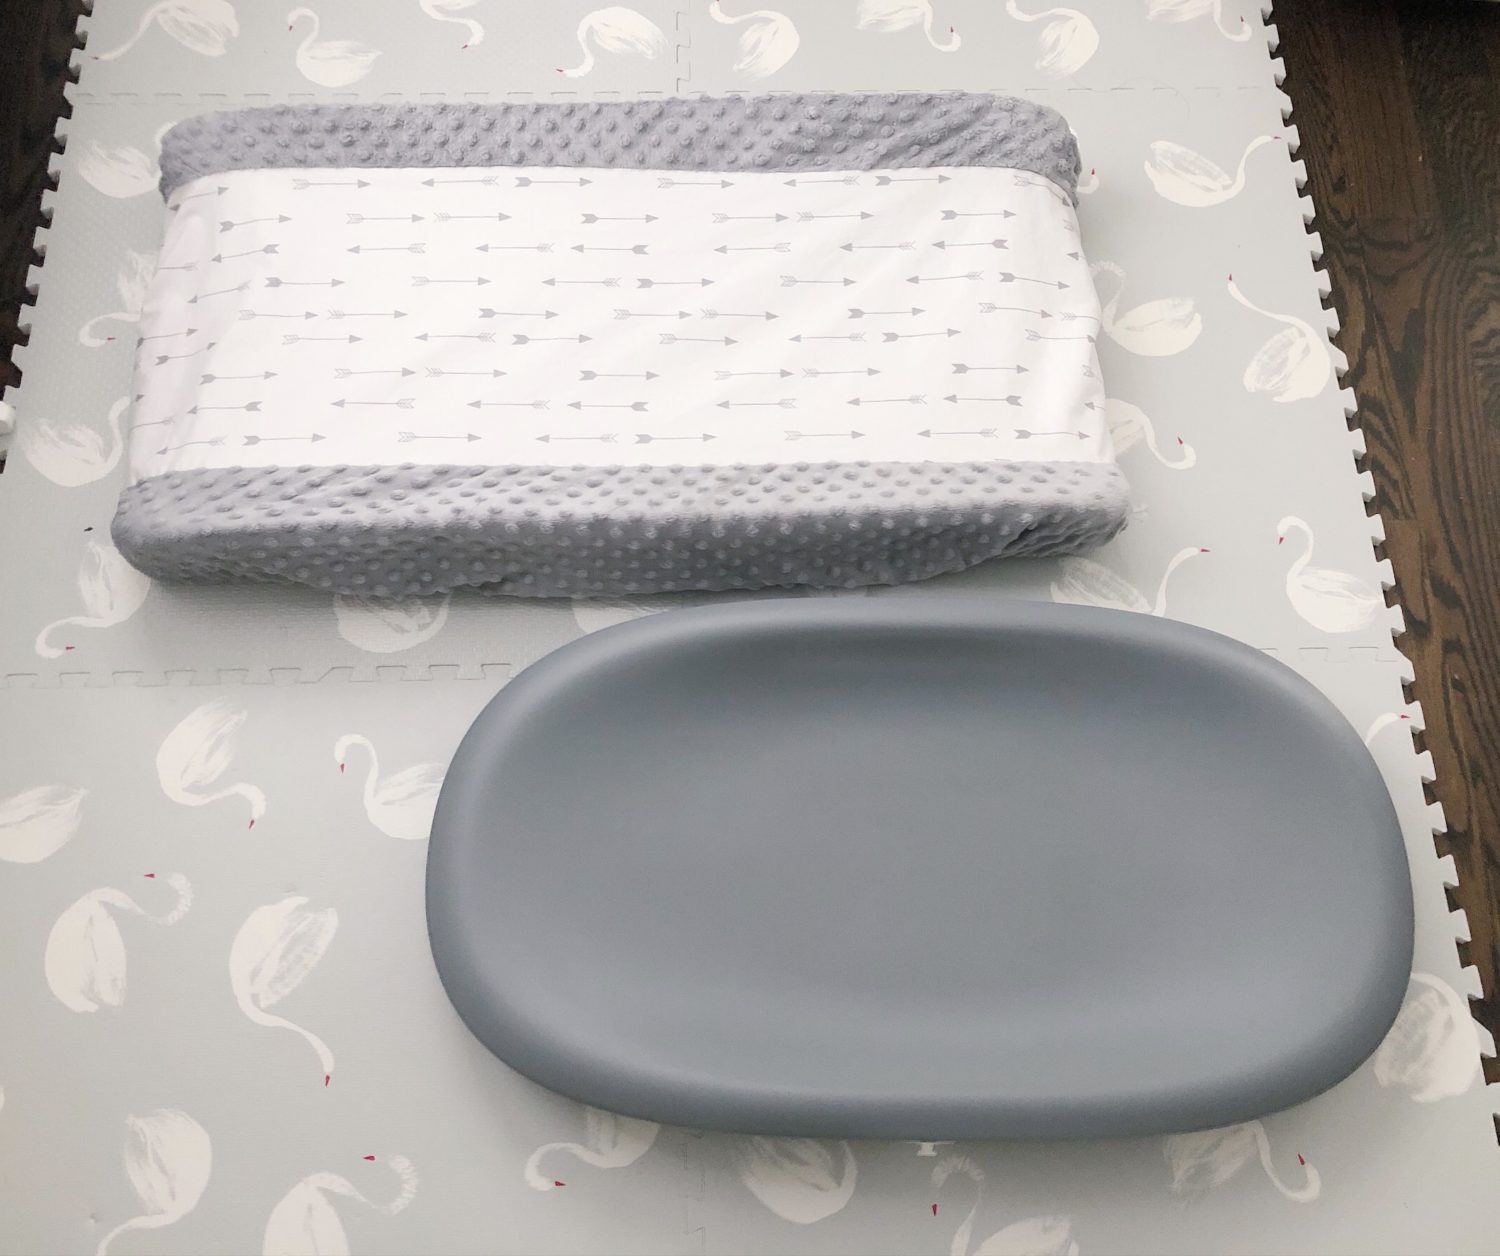 waterproof diaper changing pad hatch scale review